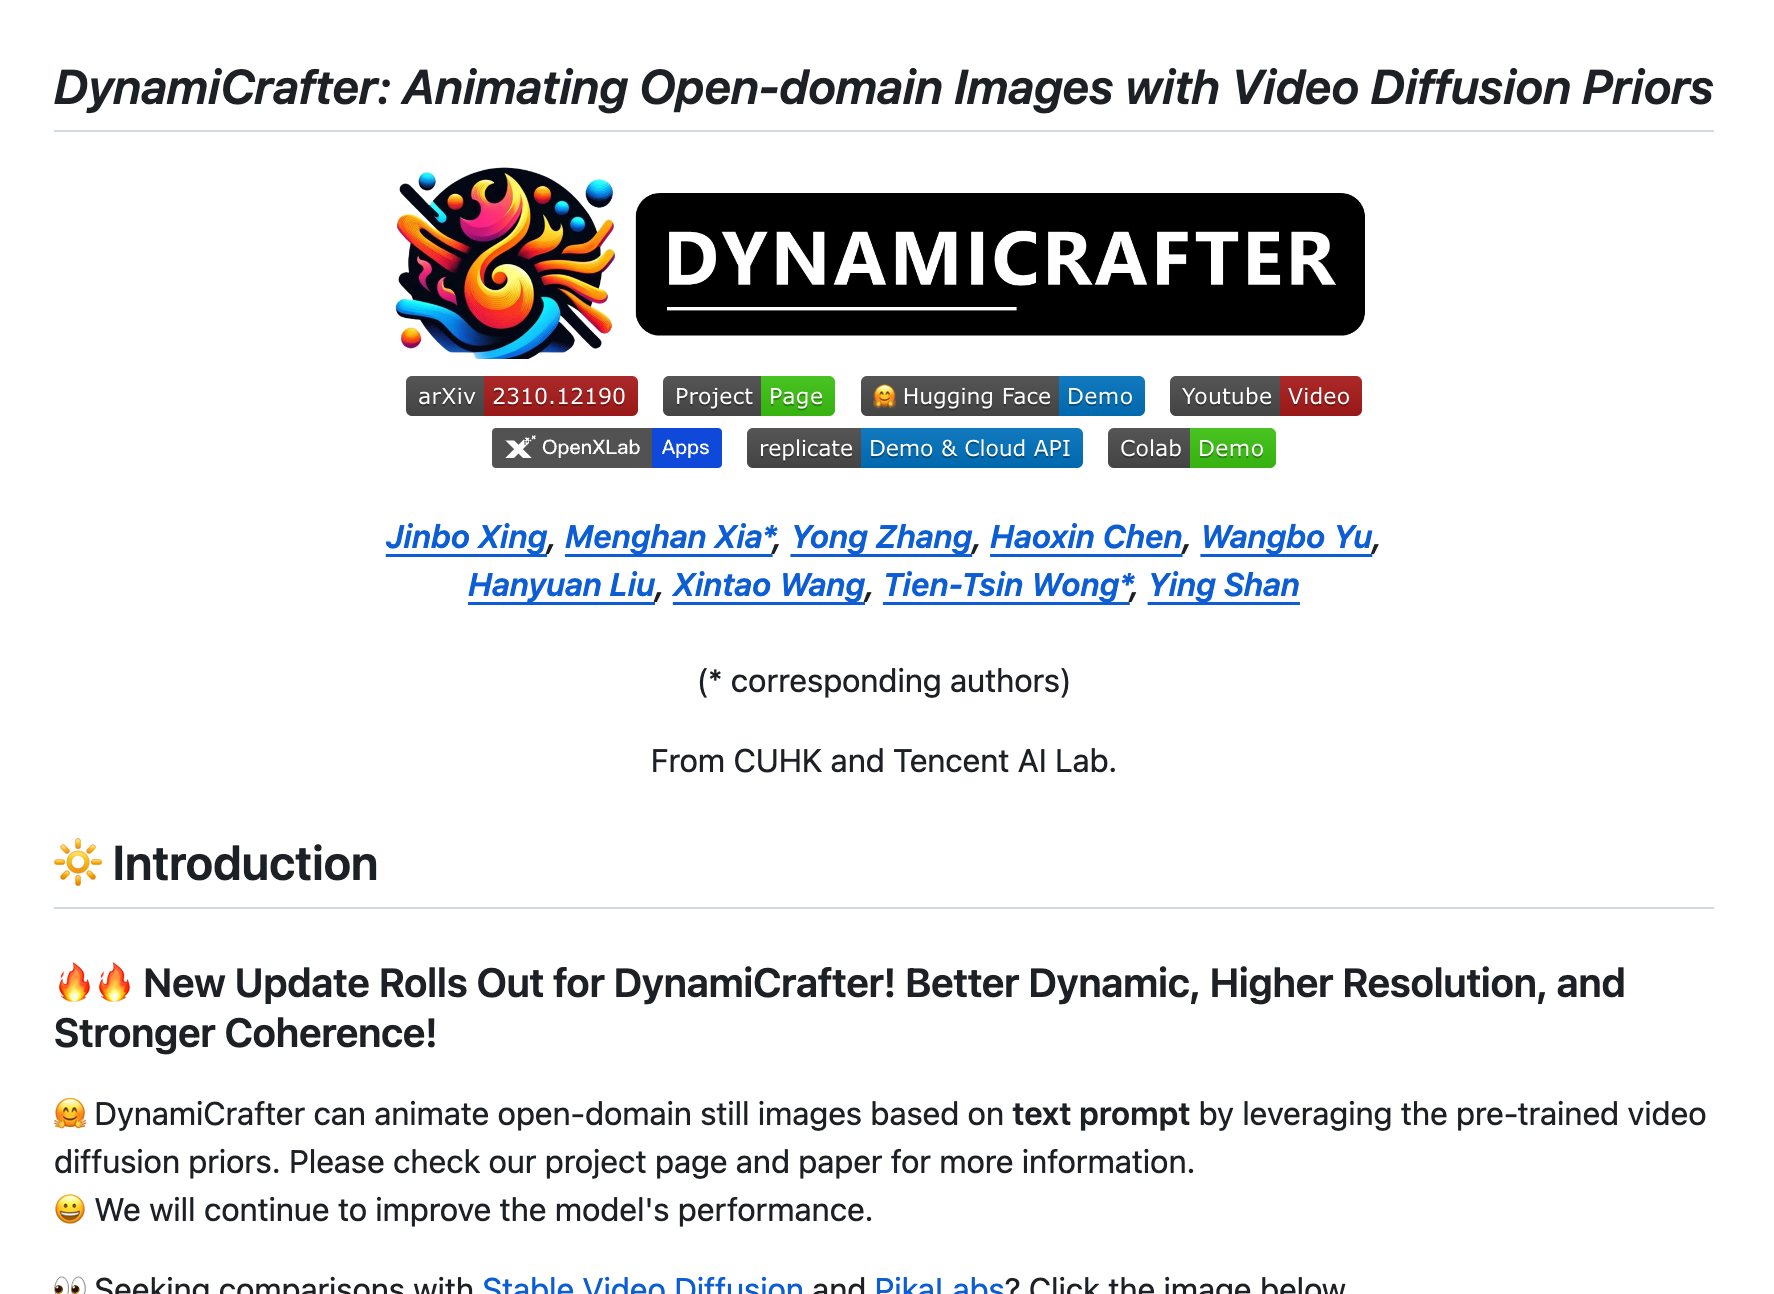 DynamiCrafter